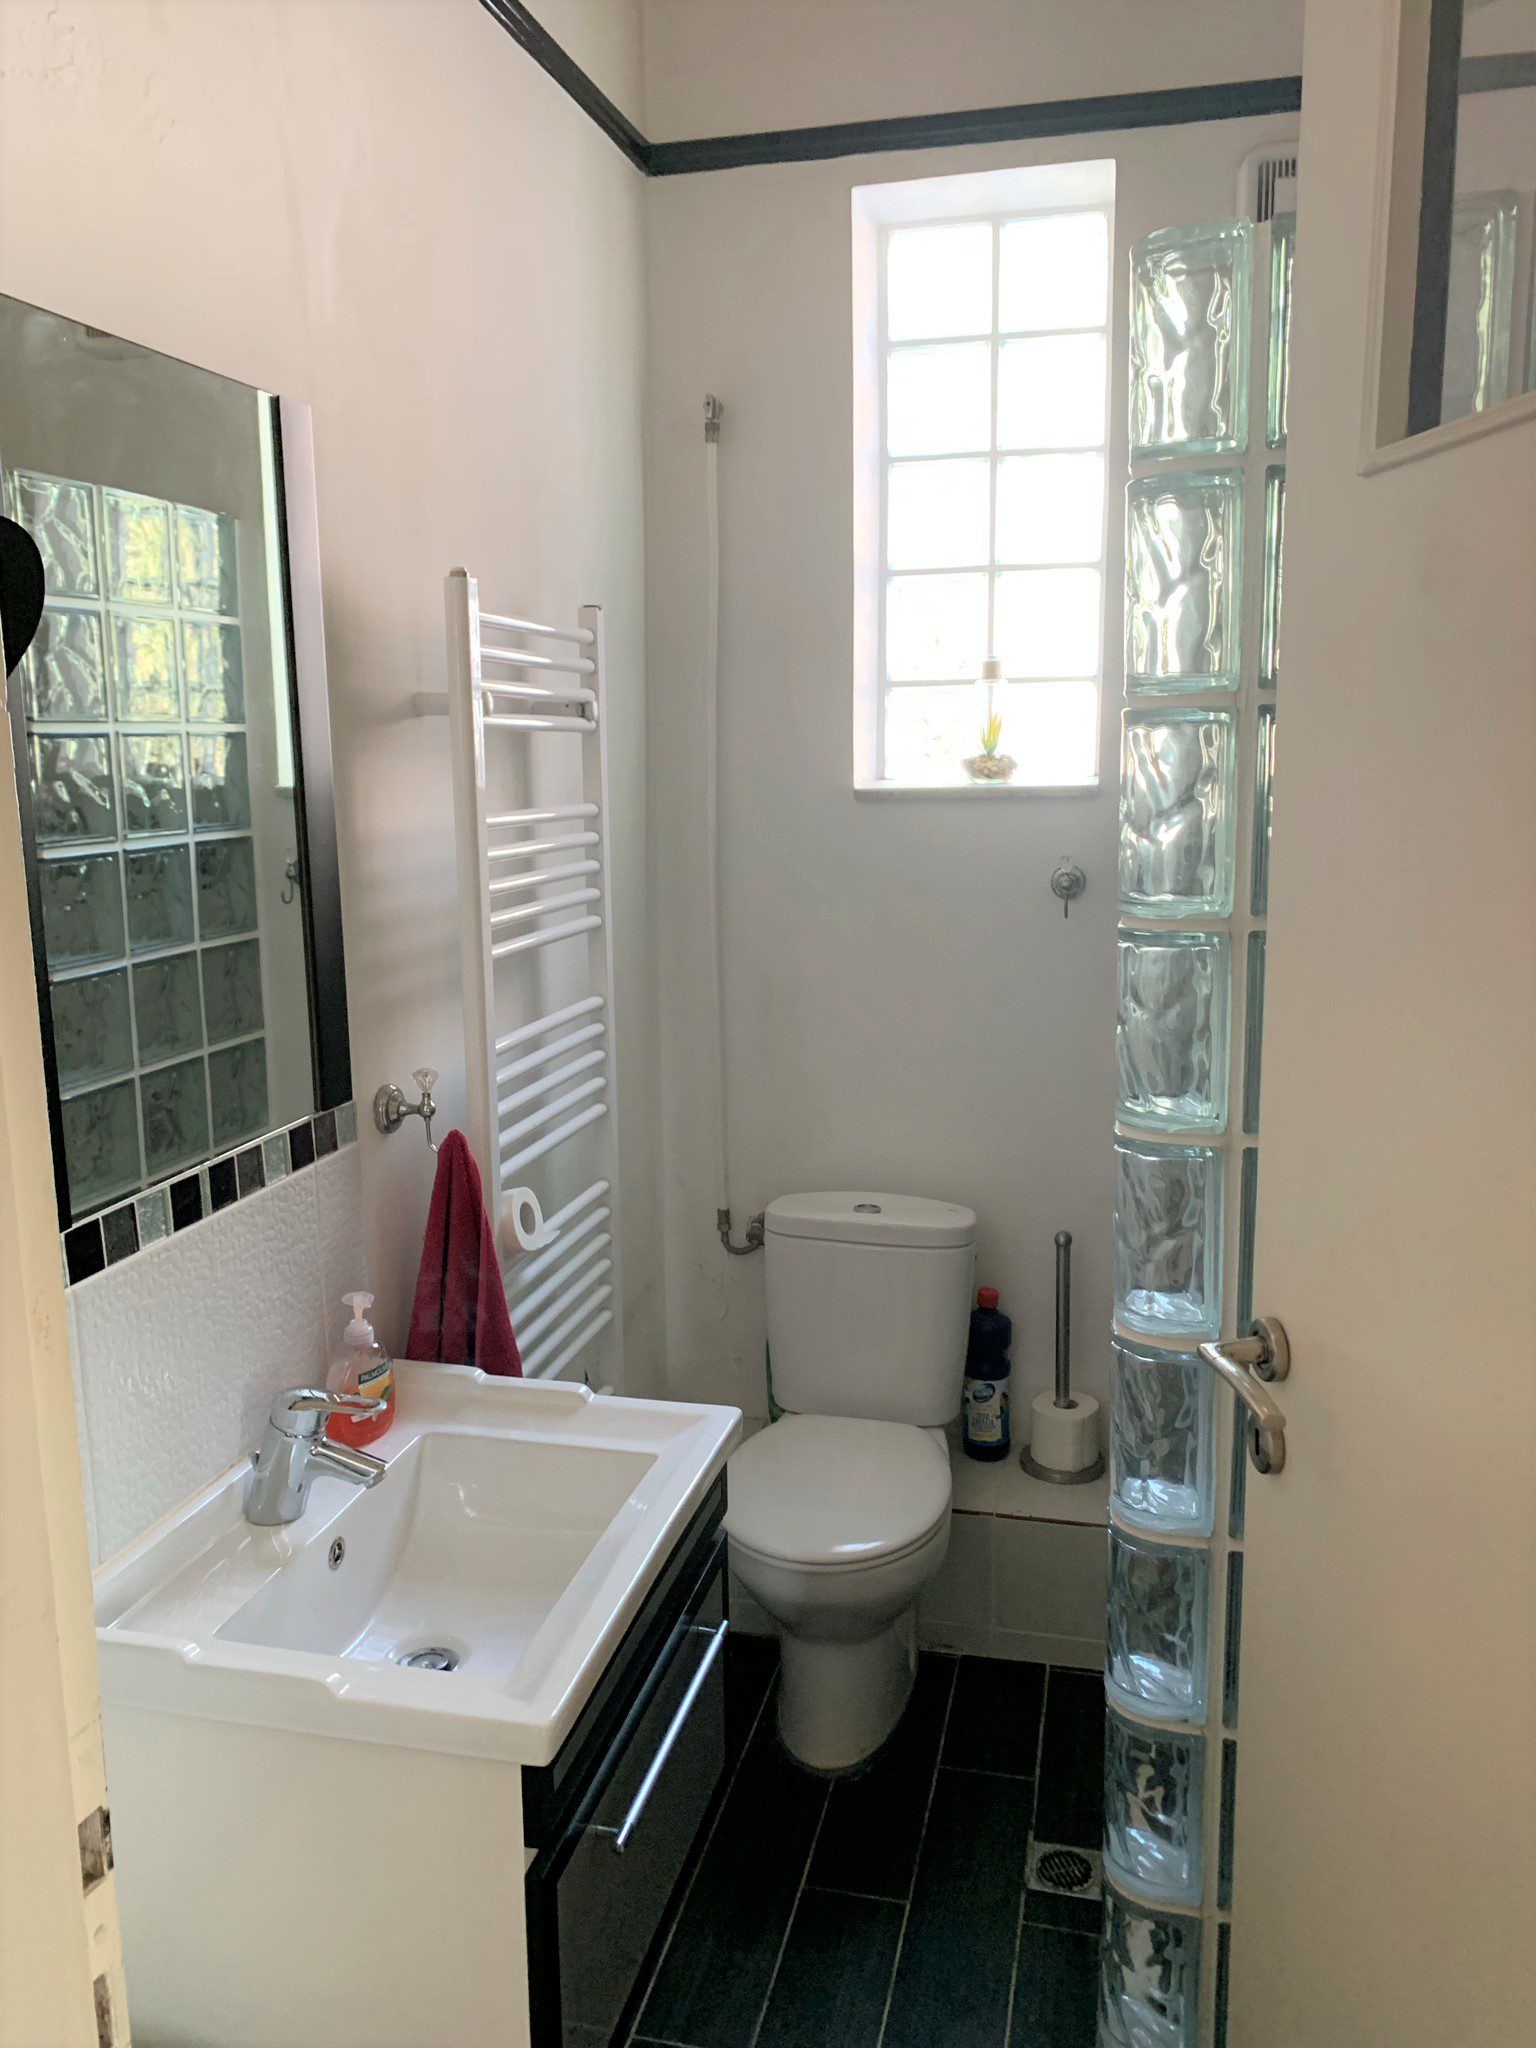 Bathroom of house for sale in Ithaca Greece, Lefki